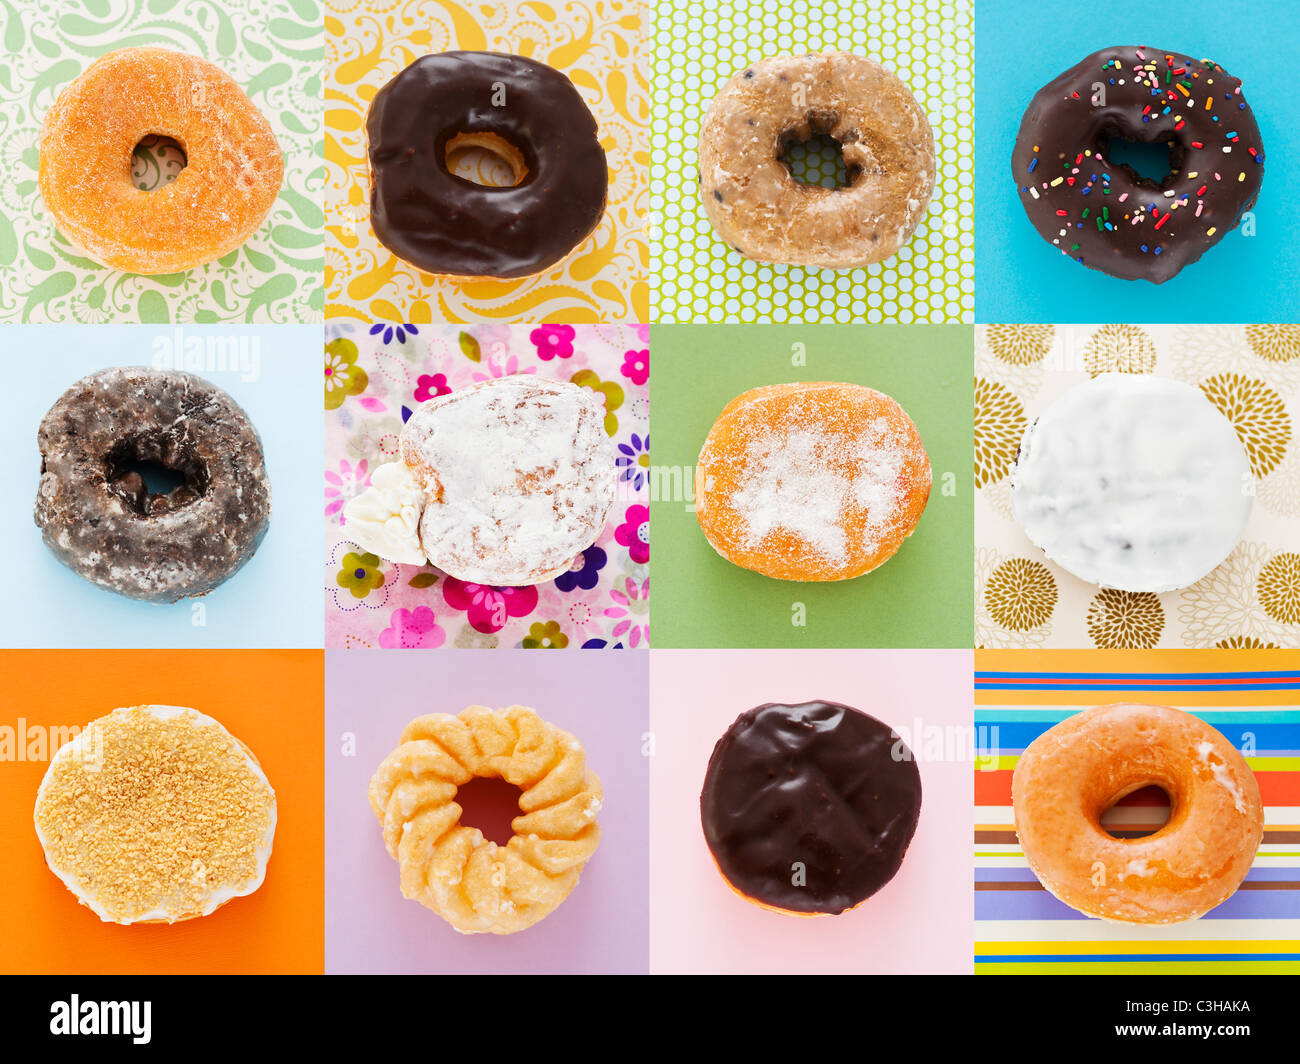 Selection of doughnuts on colorful background Stock Photo